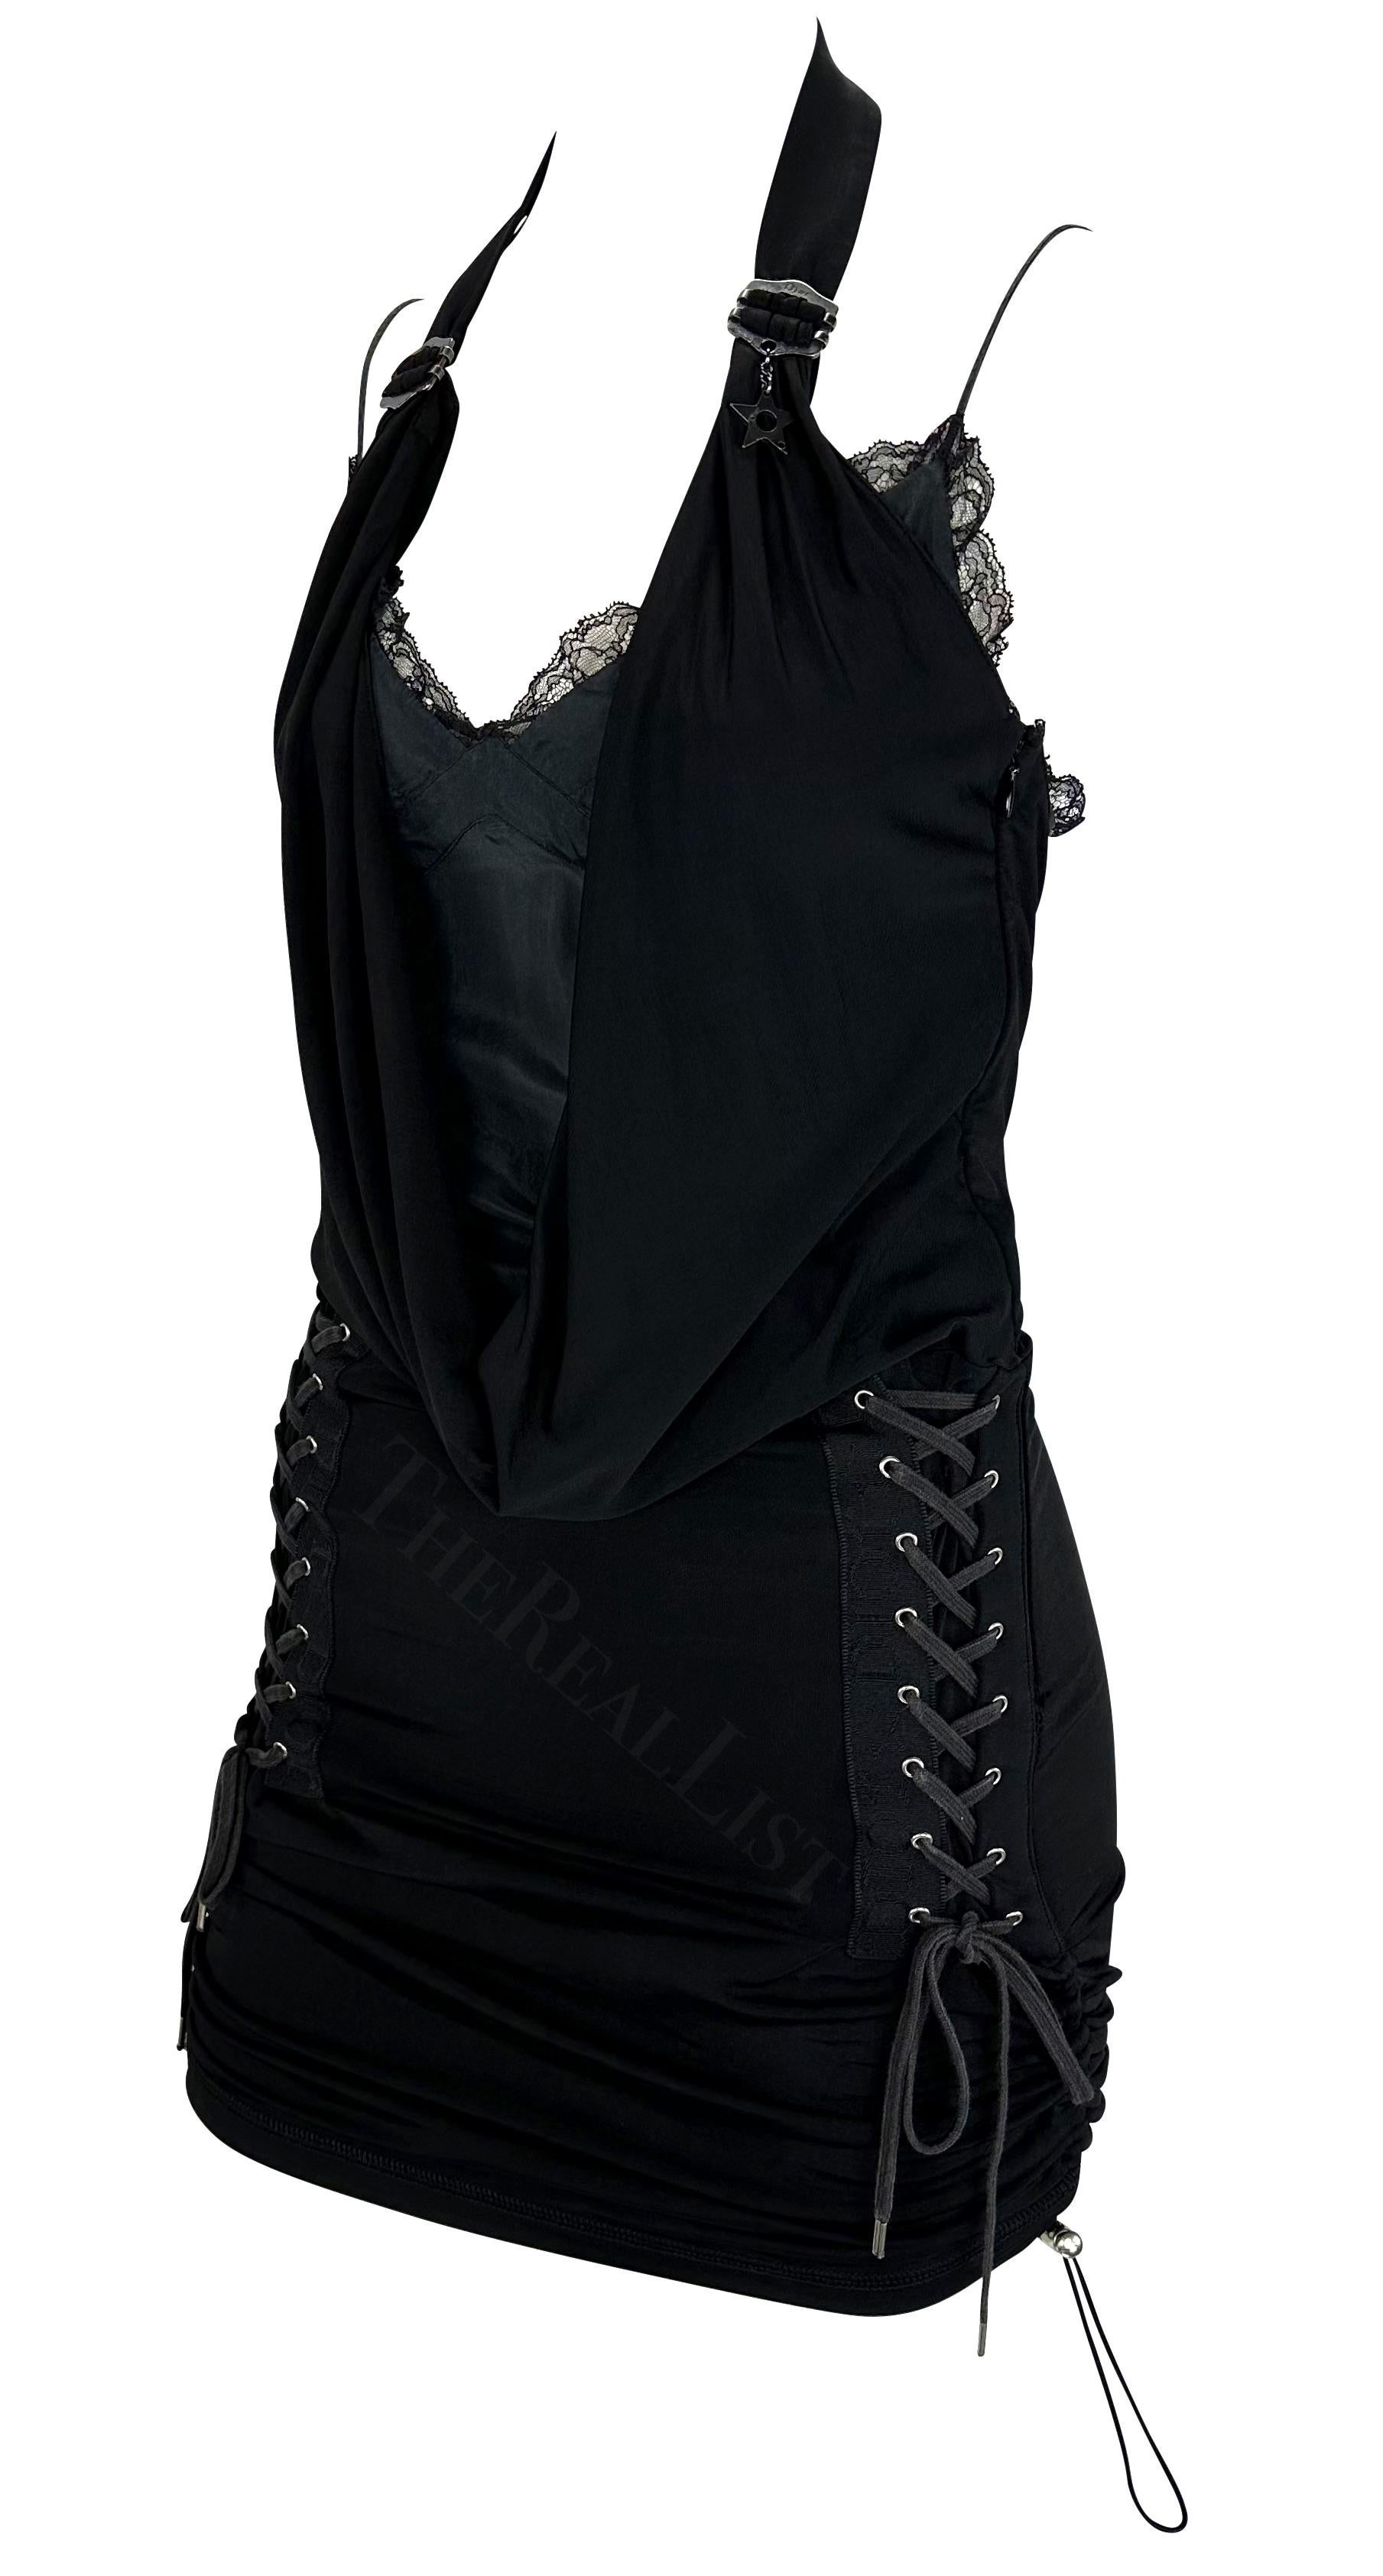 Presenting a fabulous black Christian Dior mini dress, designed by John Galliano. From the Spring/Summer 2004 collection, this sexy dress features a halterneck strap that drapes into a low cowl neck, lace-up accents on either side of the skirt, and